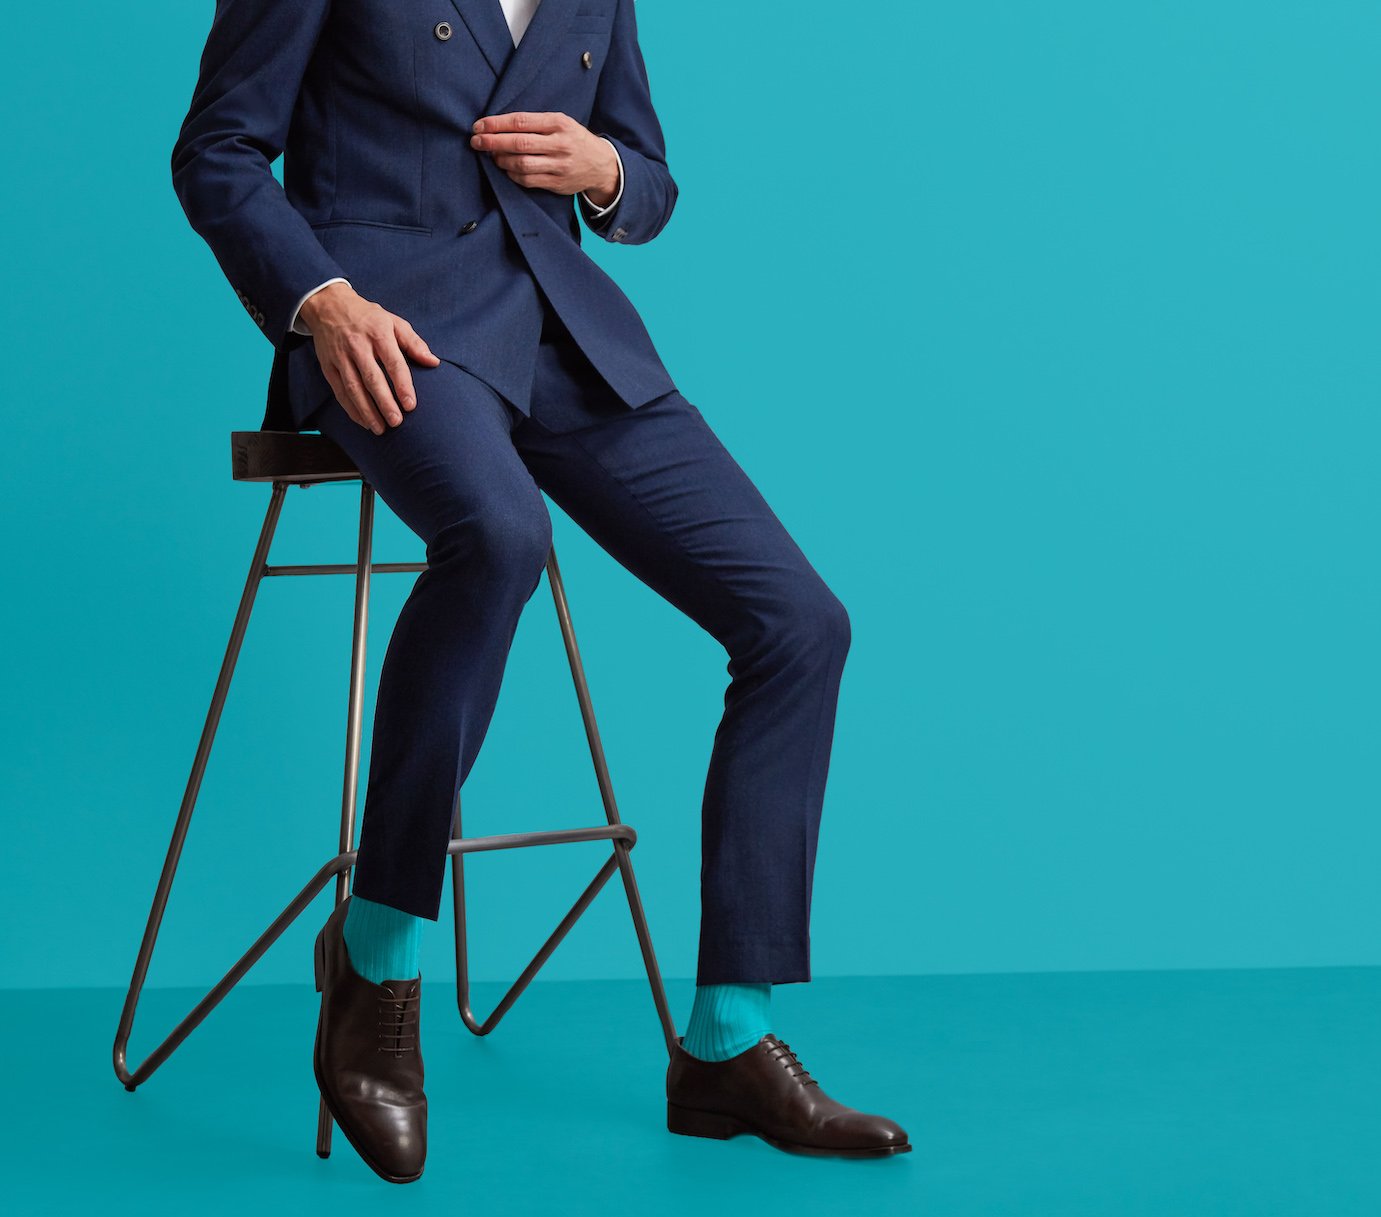 Man in suit and turquoise socks by London Sock Company